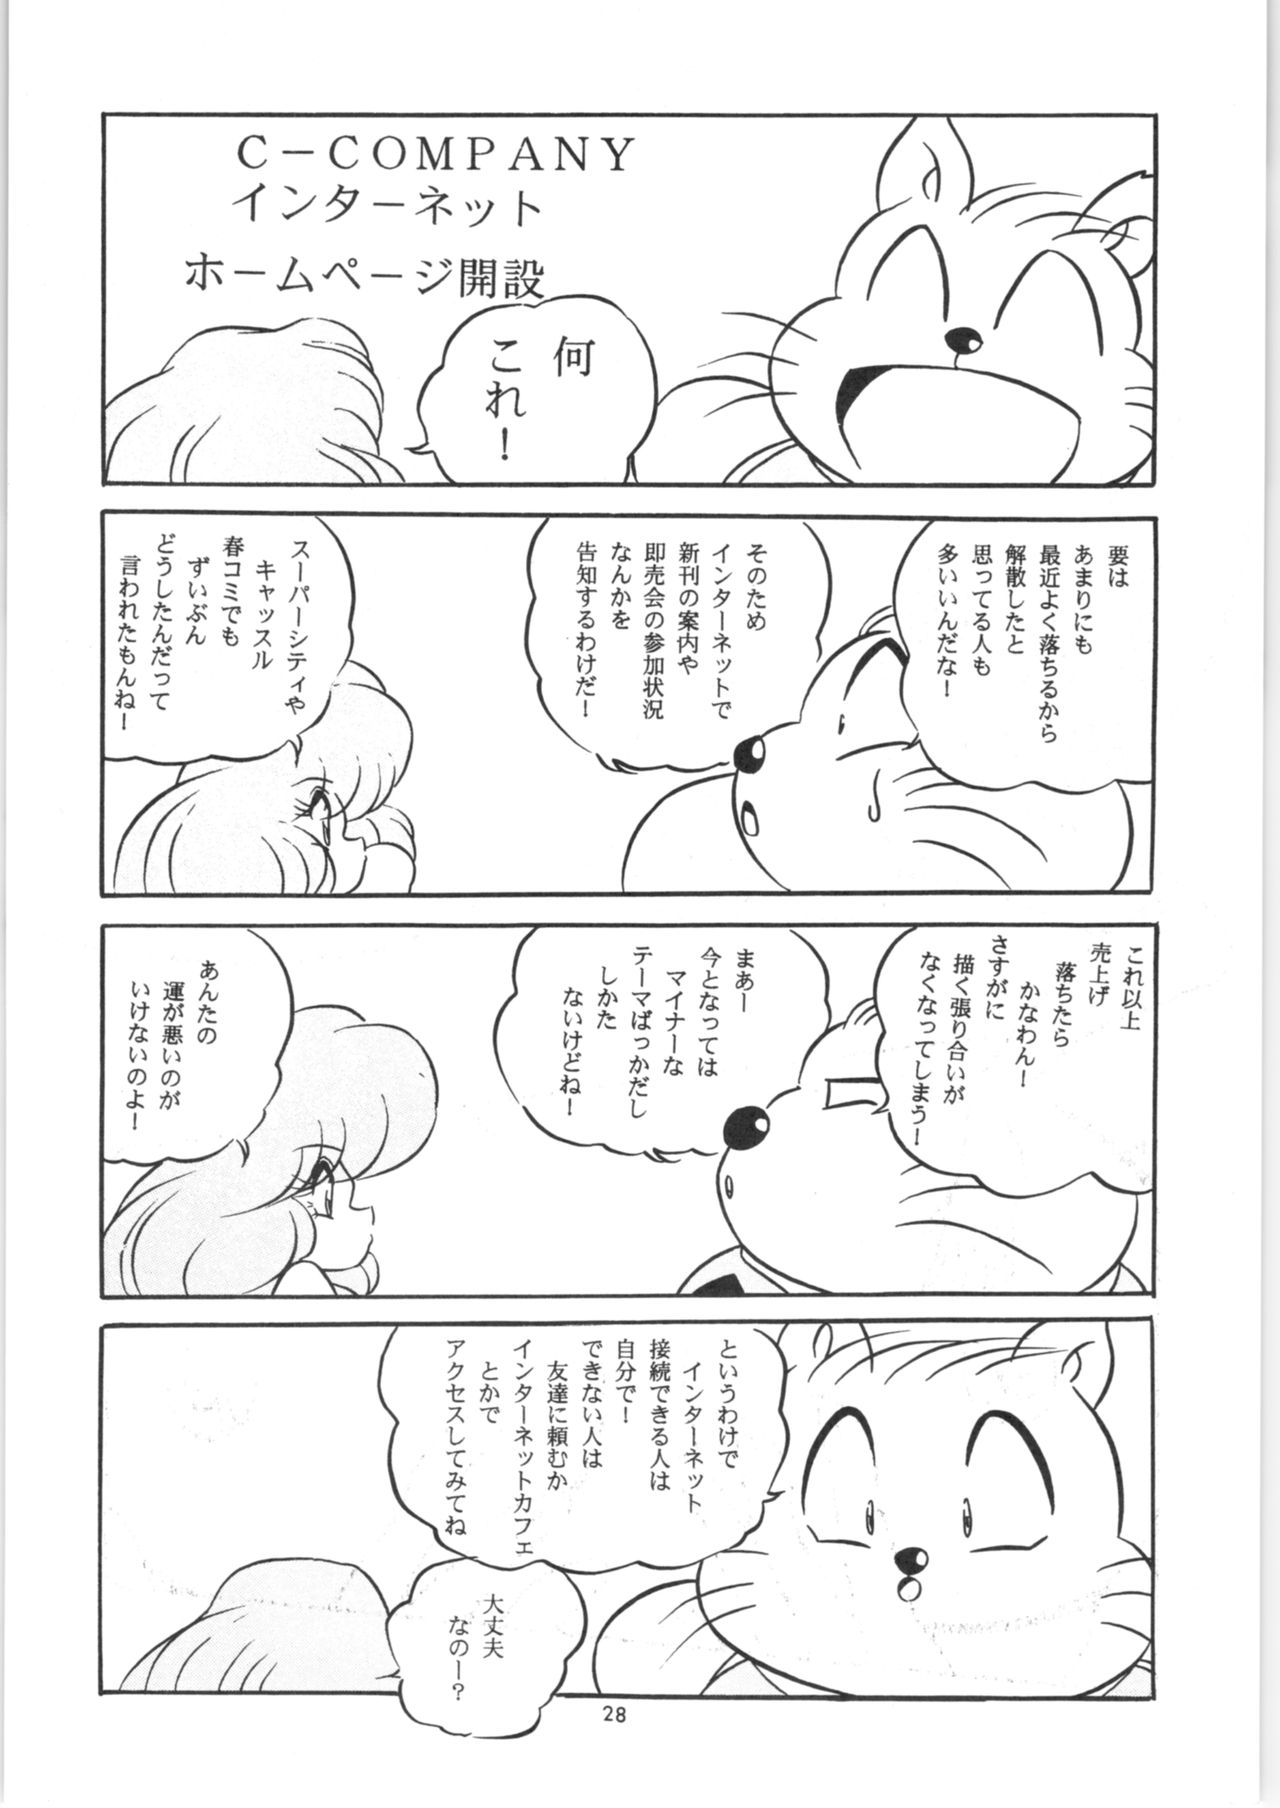 [C-COMPANY] C-COMPANY SPECIAL STAGE 18 (Ranma 1/2, Idol Project) page 29 full